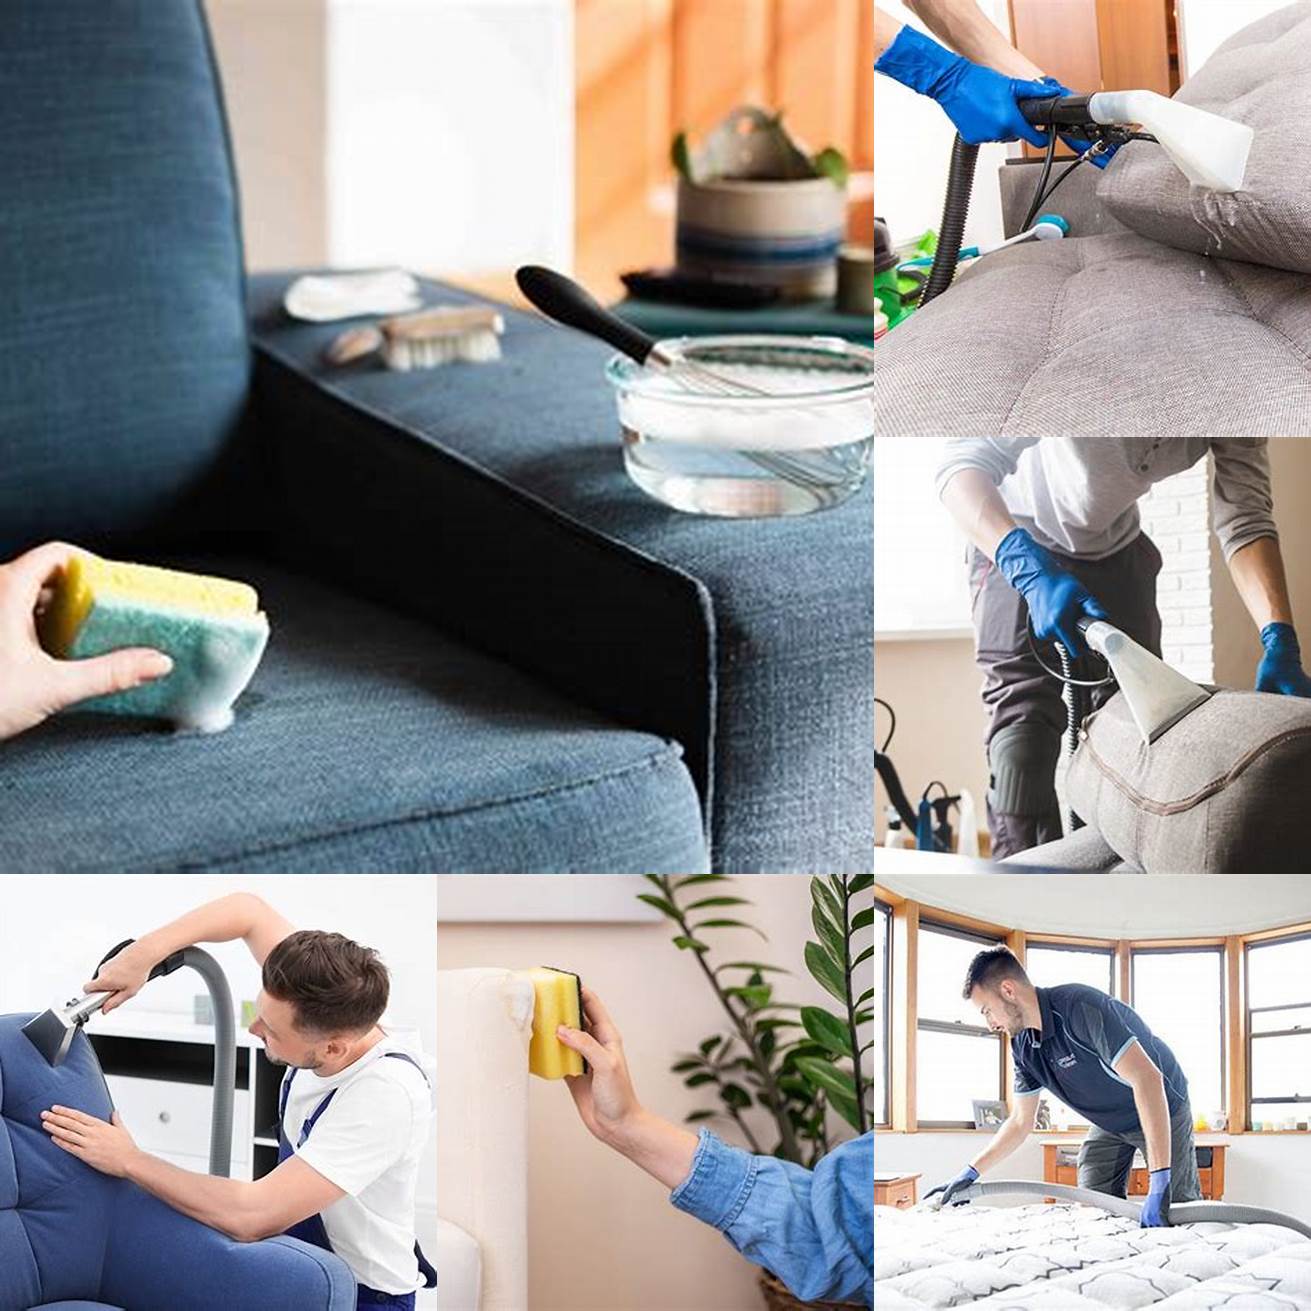 Cleaning - Upholstered beds can be more difficult to clean than other types of beds as the upholstery can trap dust dirt and pet hair